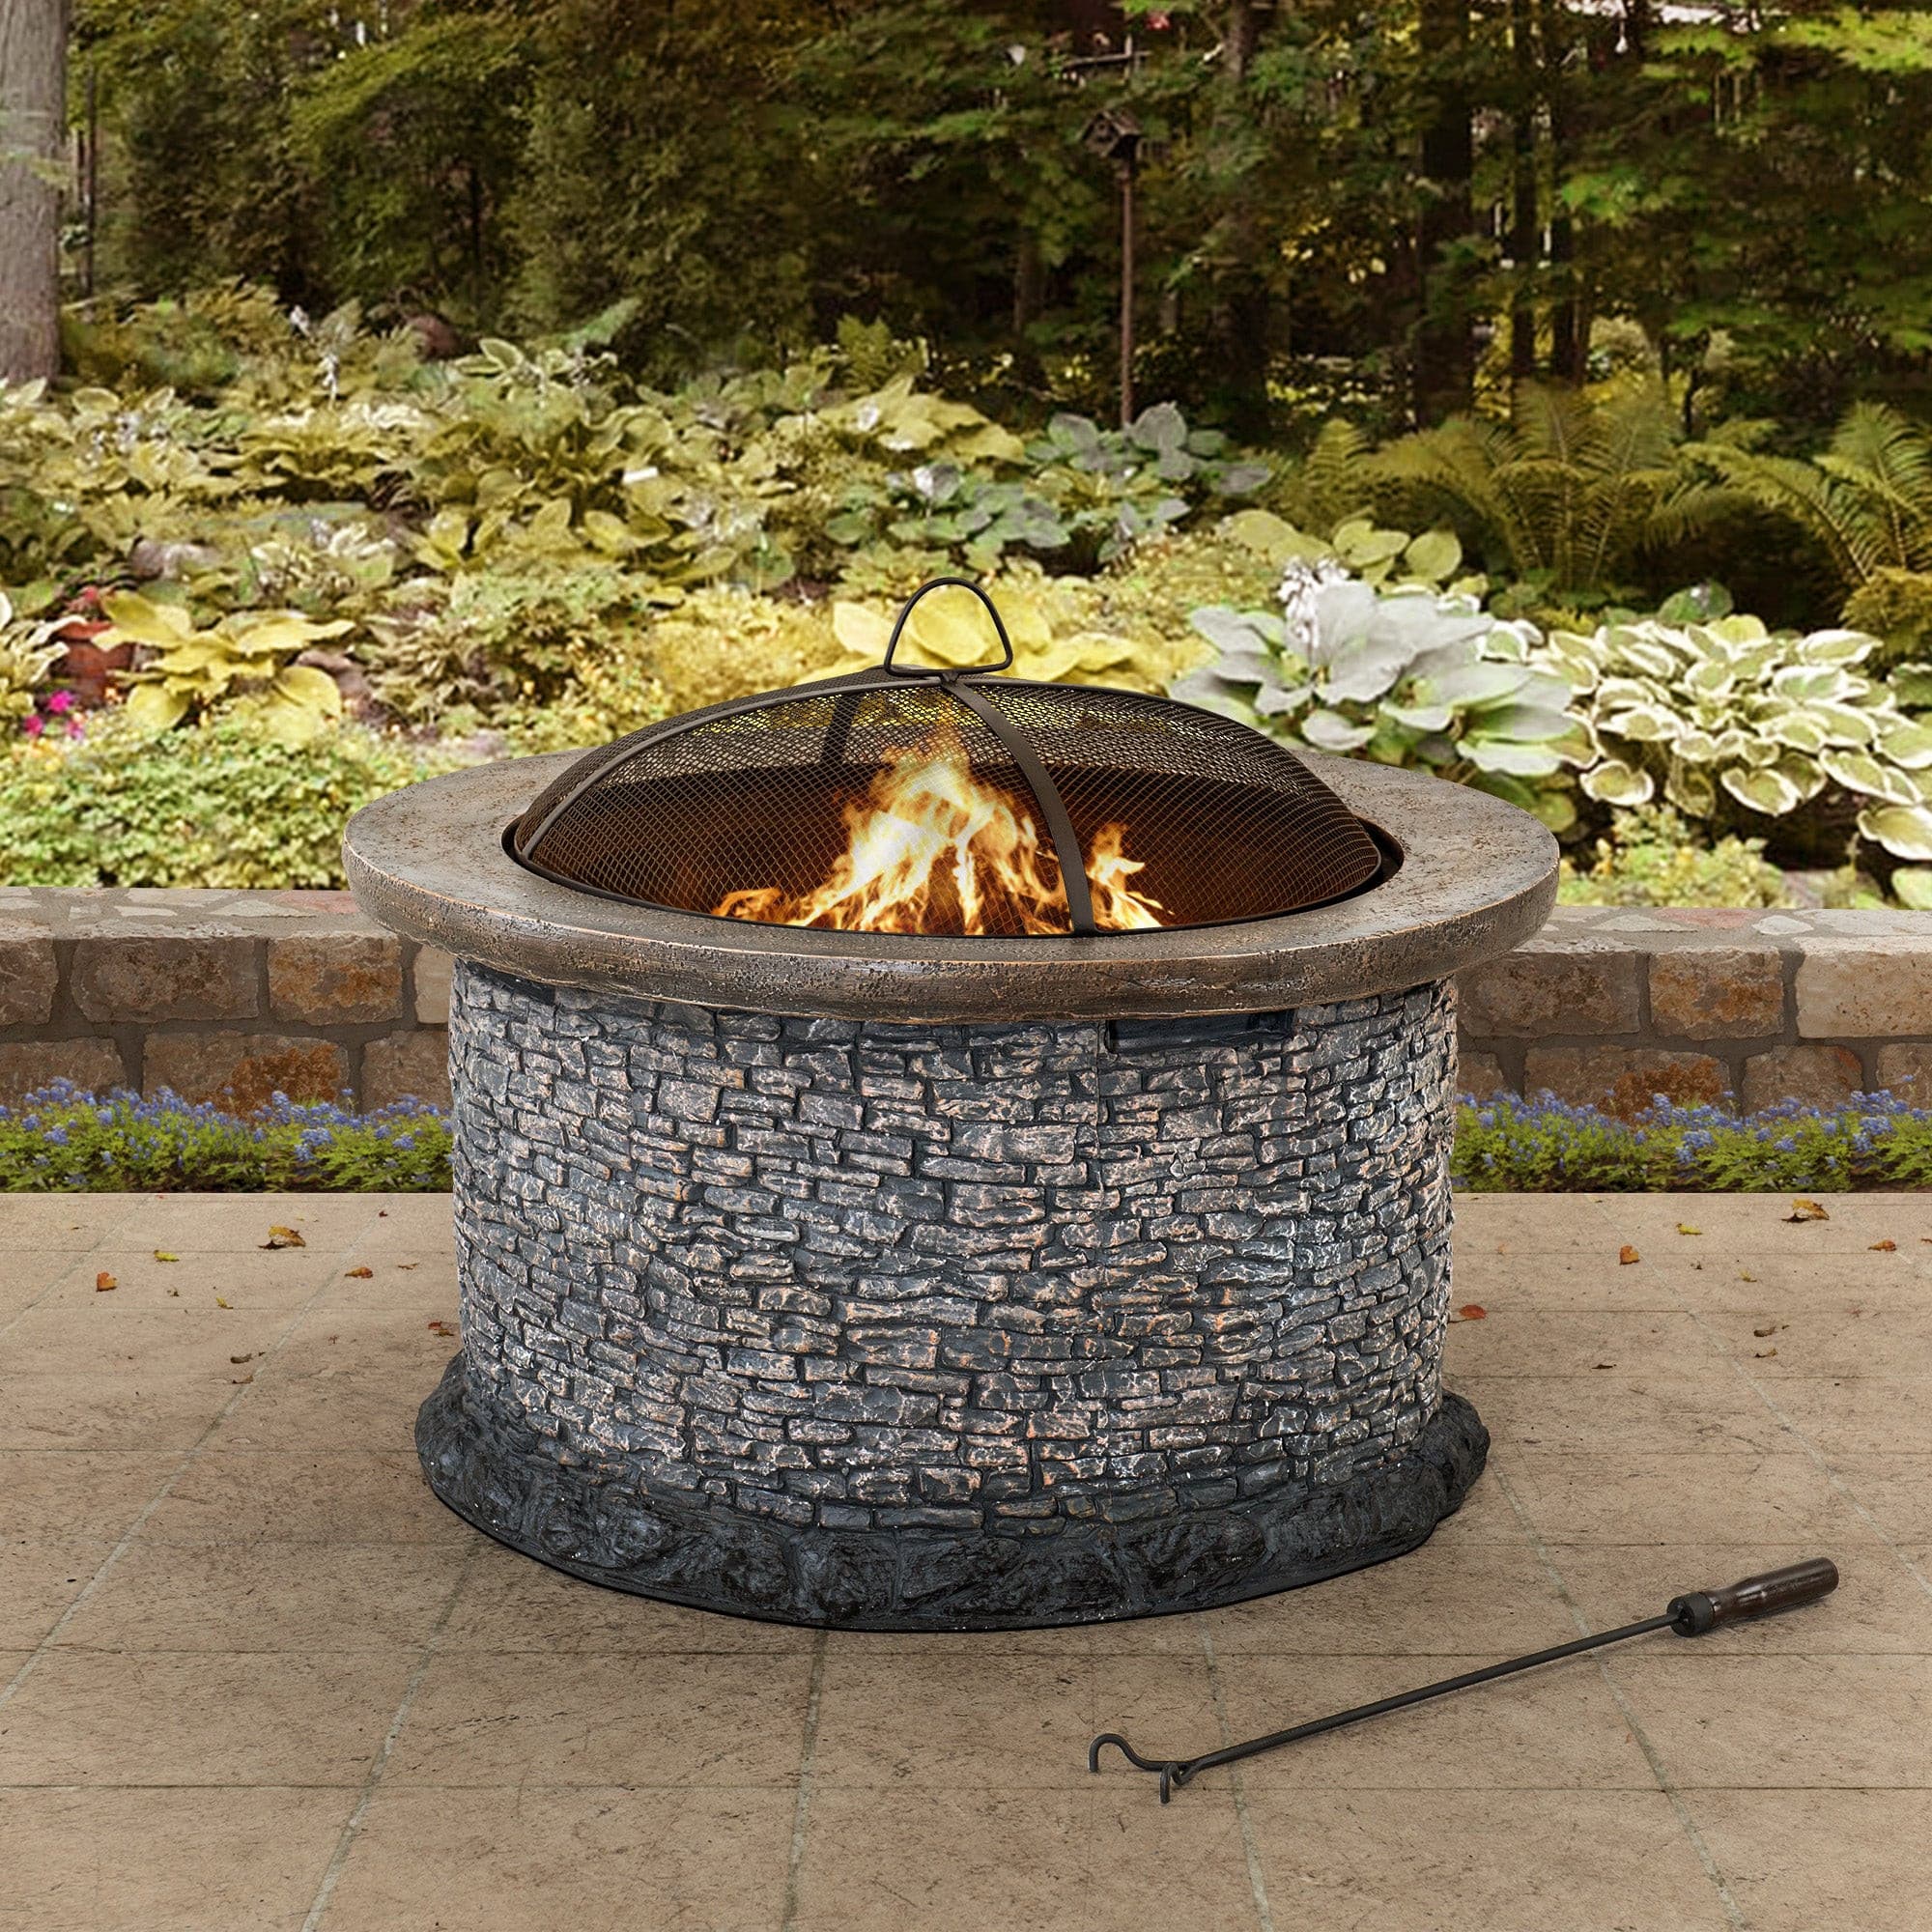 Sunjoy 32 in. Outdoor Fire Pit Brown and Gray Patio Fire Pit Wood Burning Stone Fire Pit with Spark Screen and Fire Poker